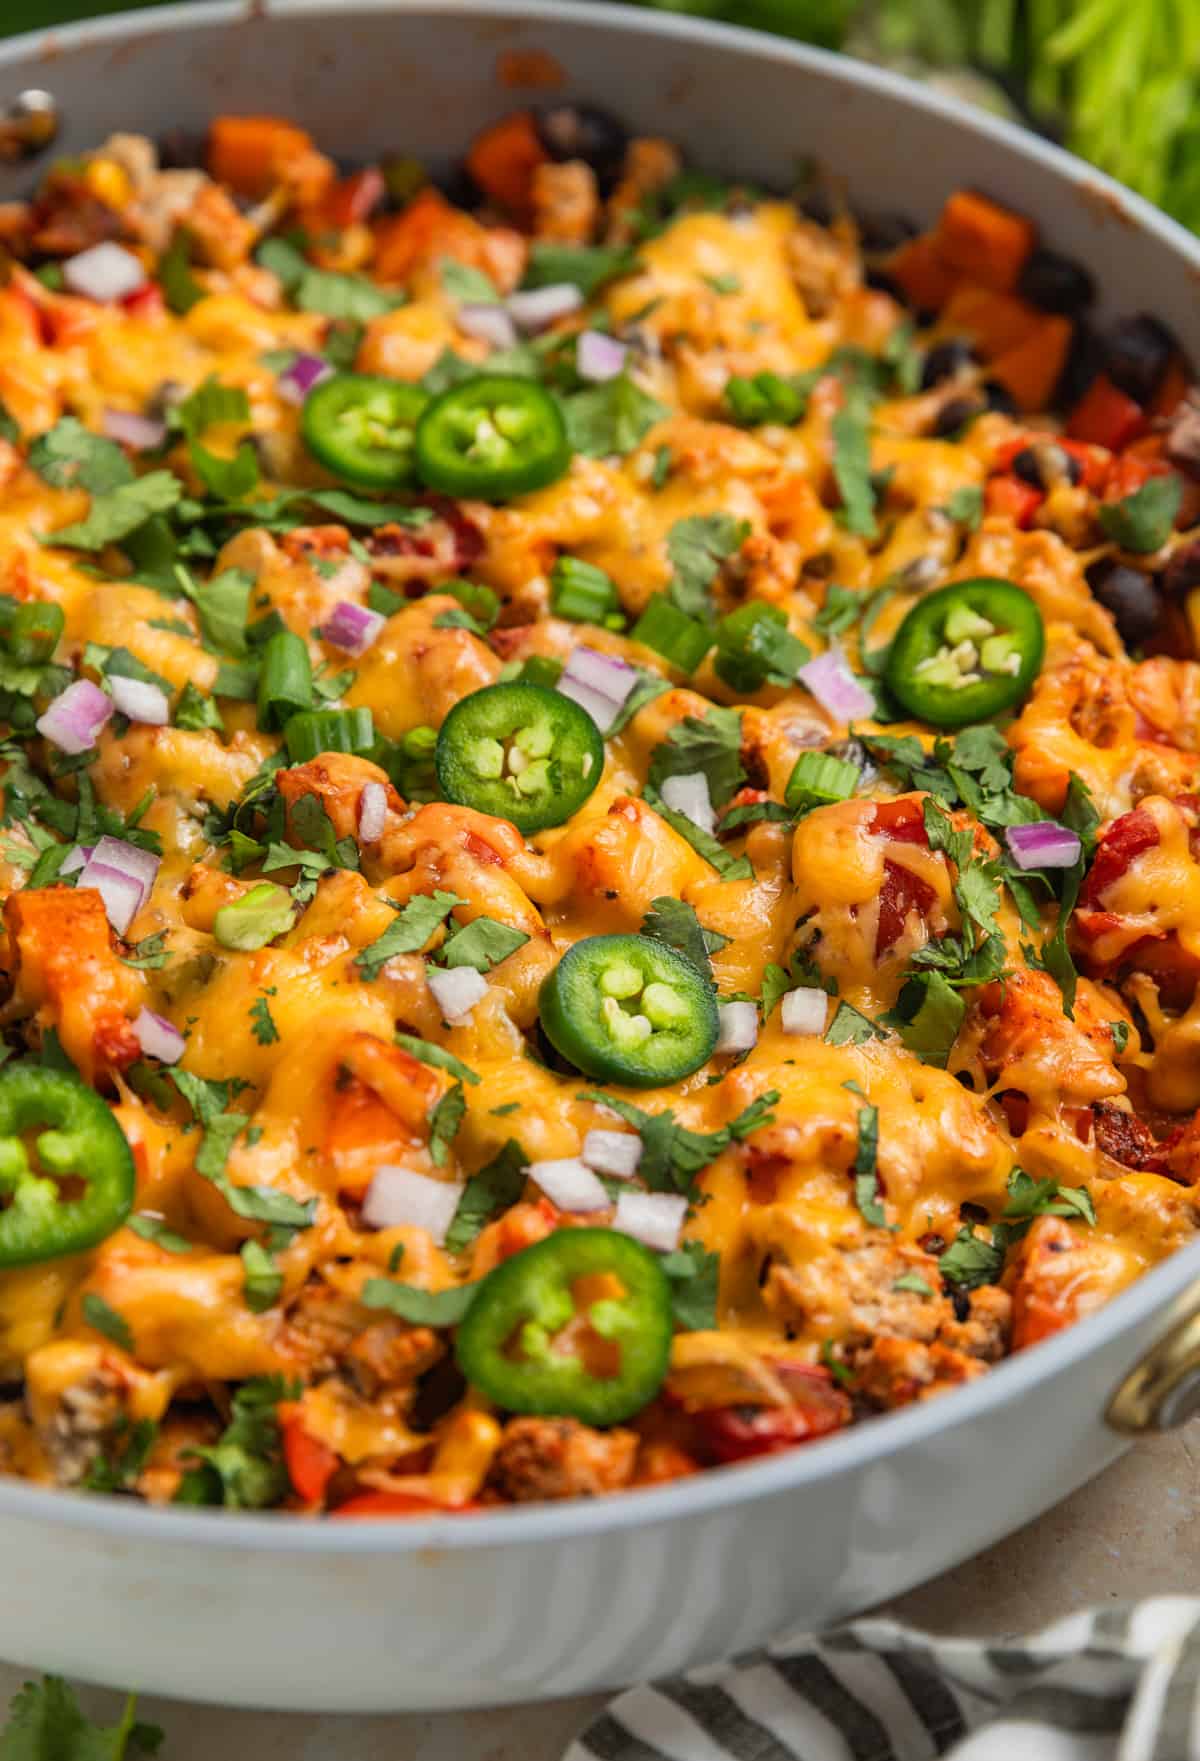 Skillet with cooked meat and vegetables topped with melted cheese, cilantro, peppers, onions and more.